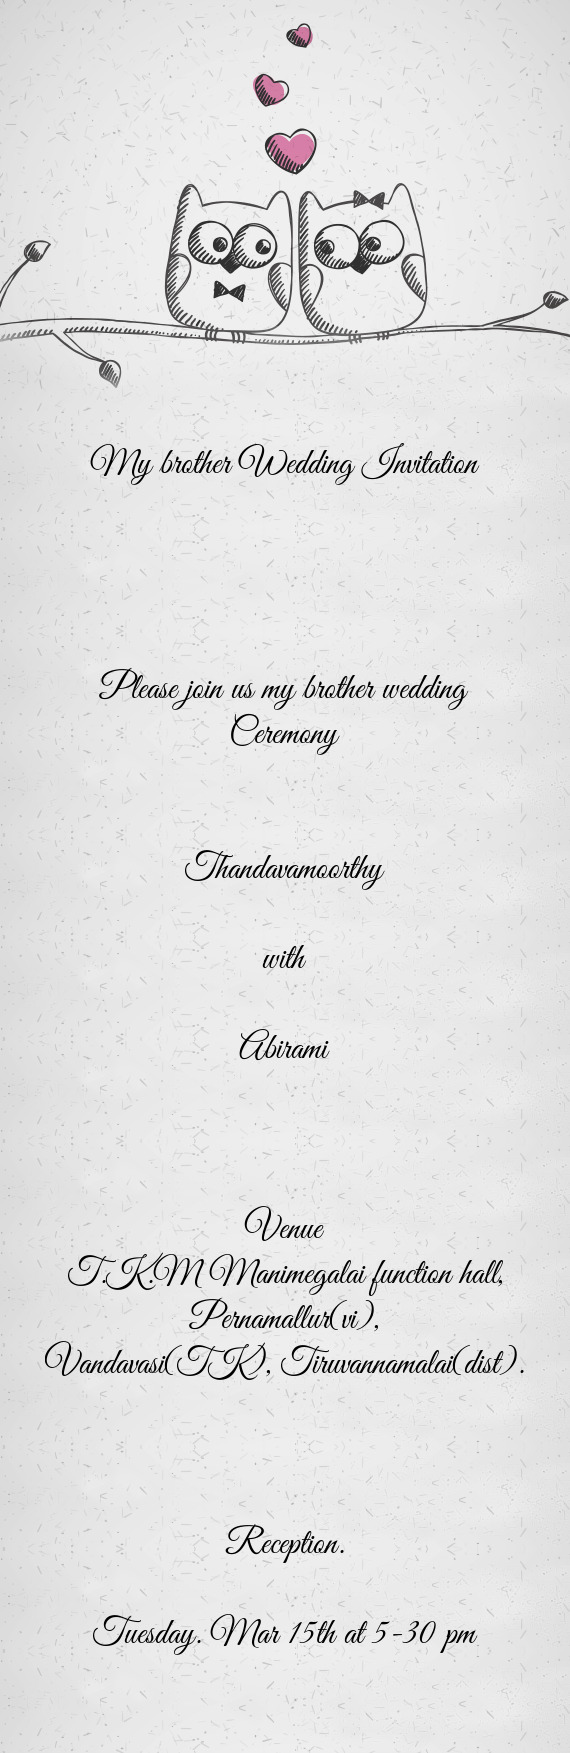 Please join us my brother wedding Ceremony